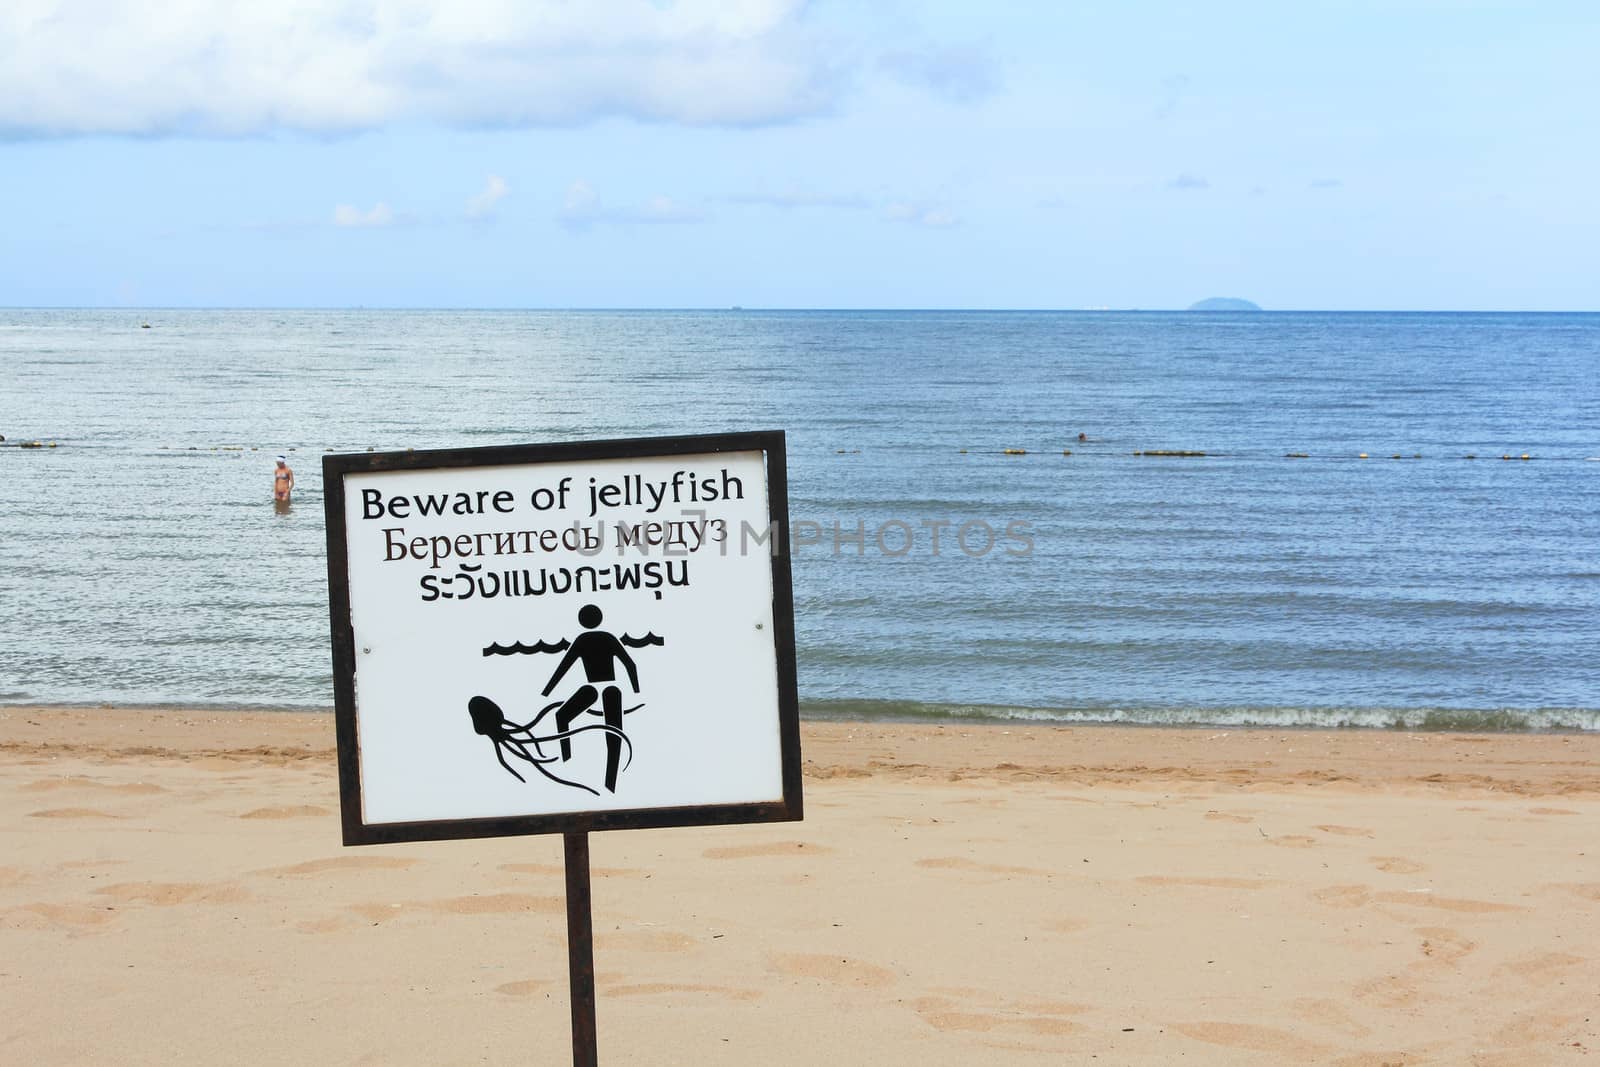 Chonburi, Thailand - September 3, 2013: Warning sign for beware of Jellyfish in Jomtien beach area in Chonburi Sea. In background is Lady takes a bath in the sea.